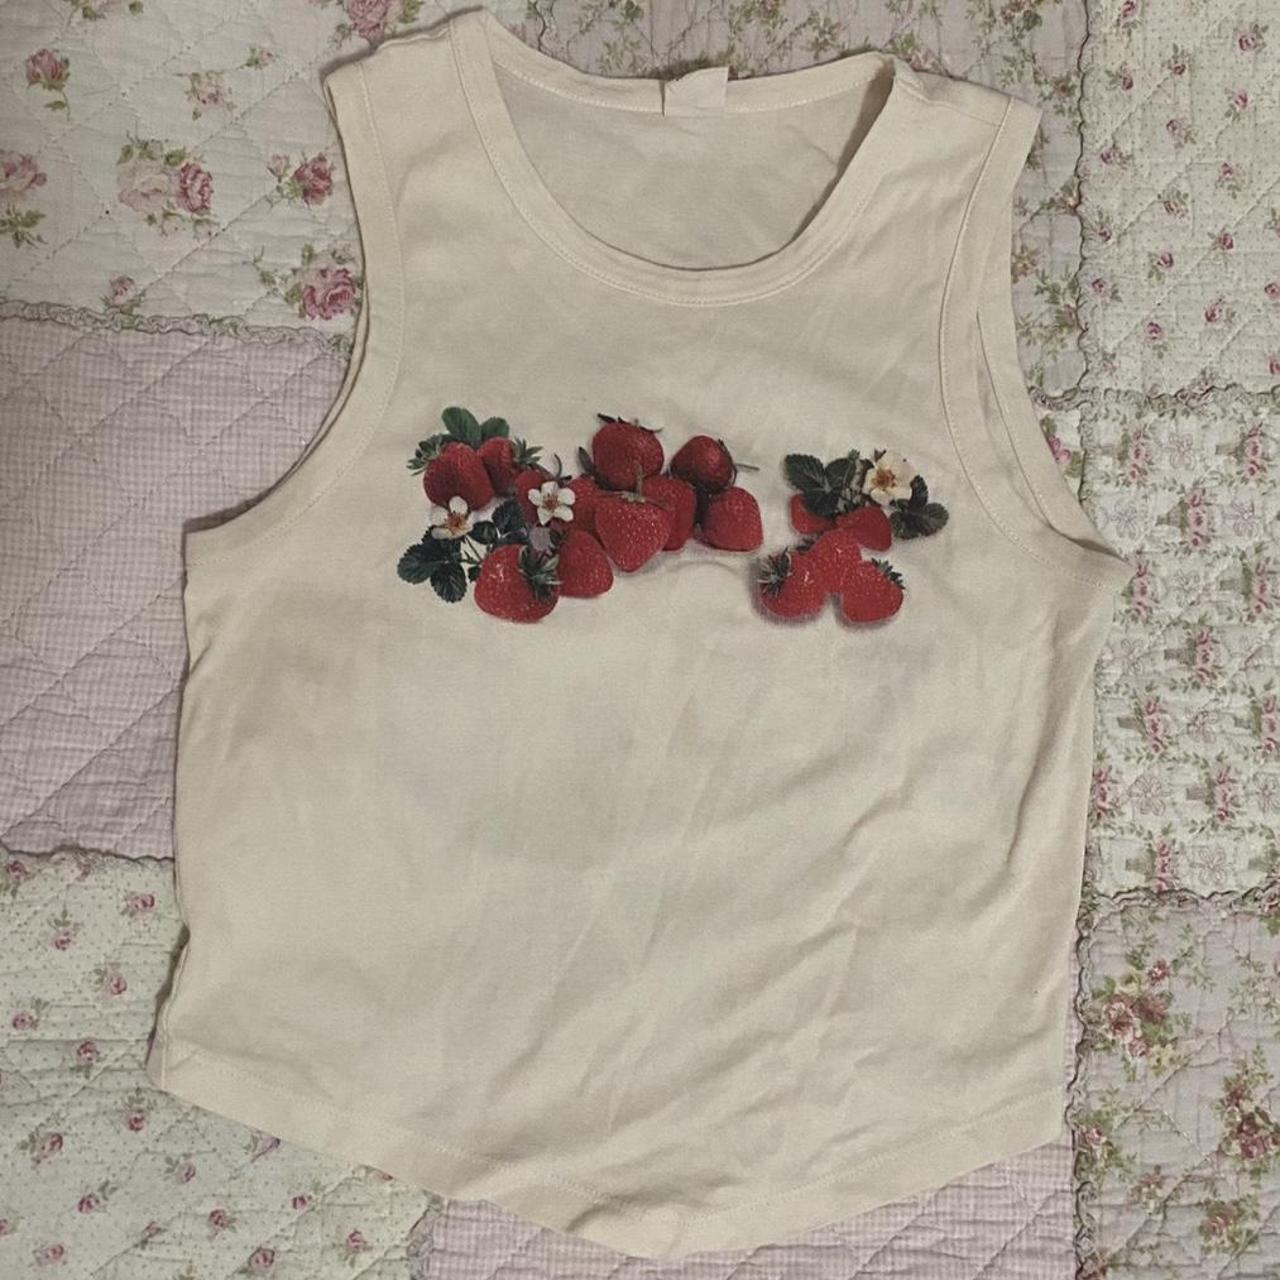 Urban Outfitters Women's Cream and Red Vests-tanks-camis